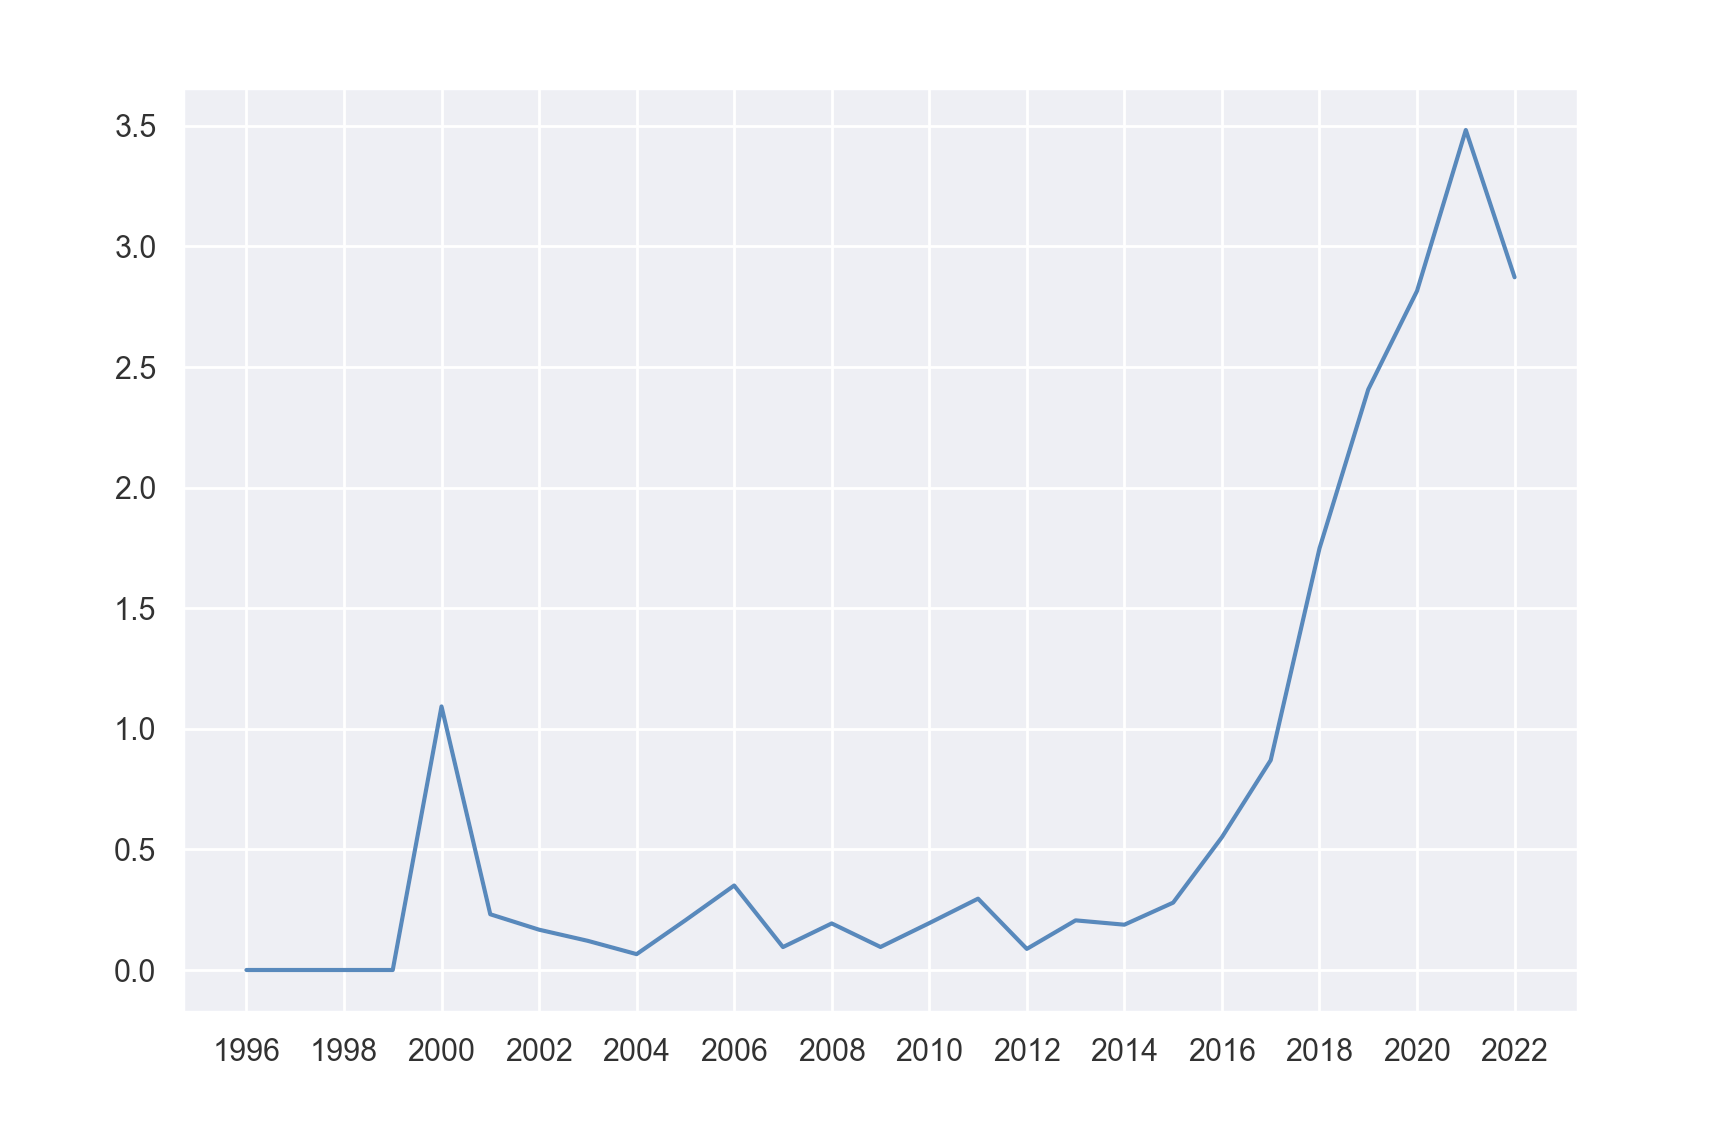 the graph shows the ratio of ml-related finance papers against all finance papers published at ssrn.com. the ratio rapidly increases after the year 2015